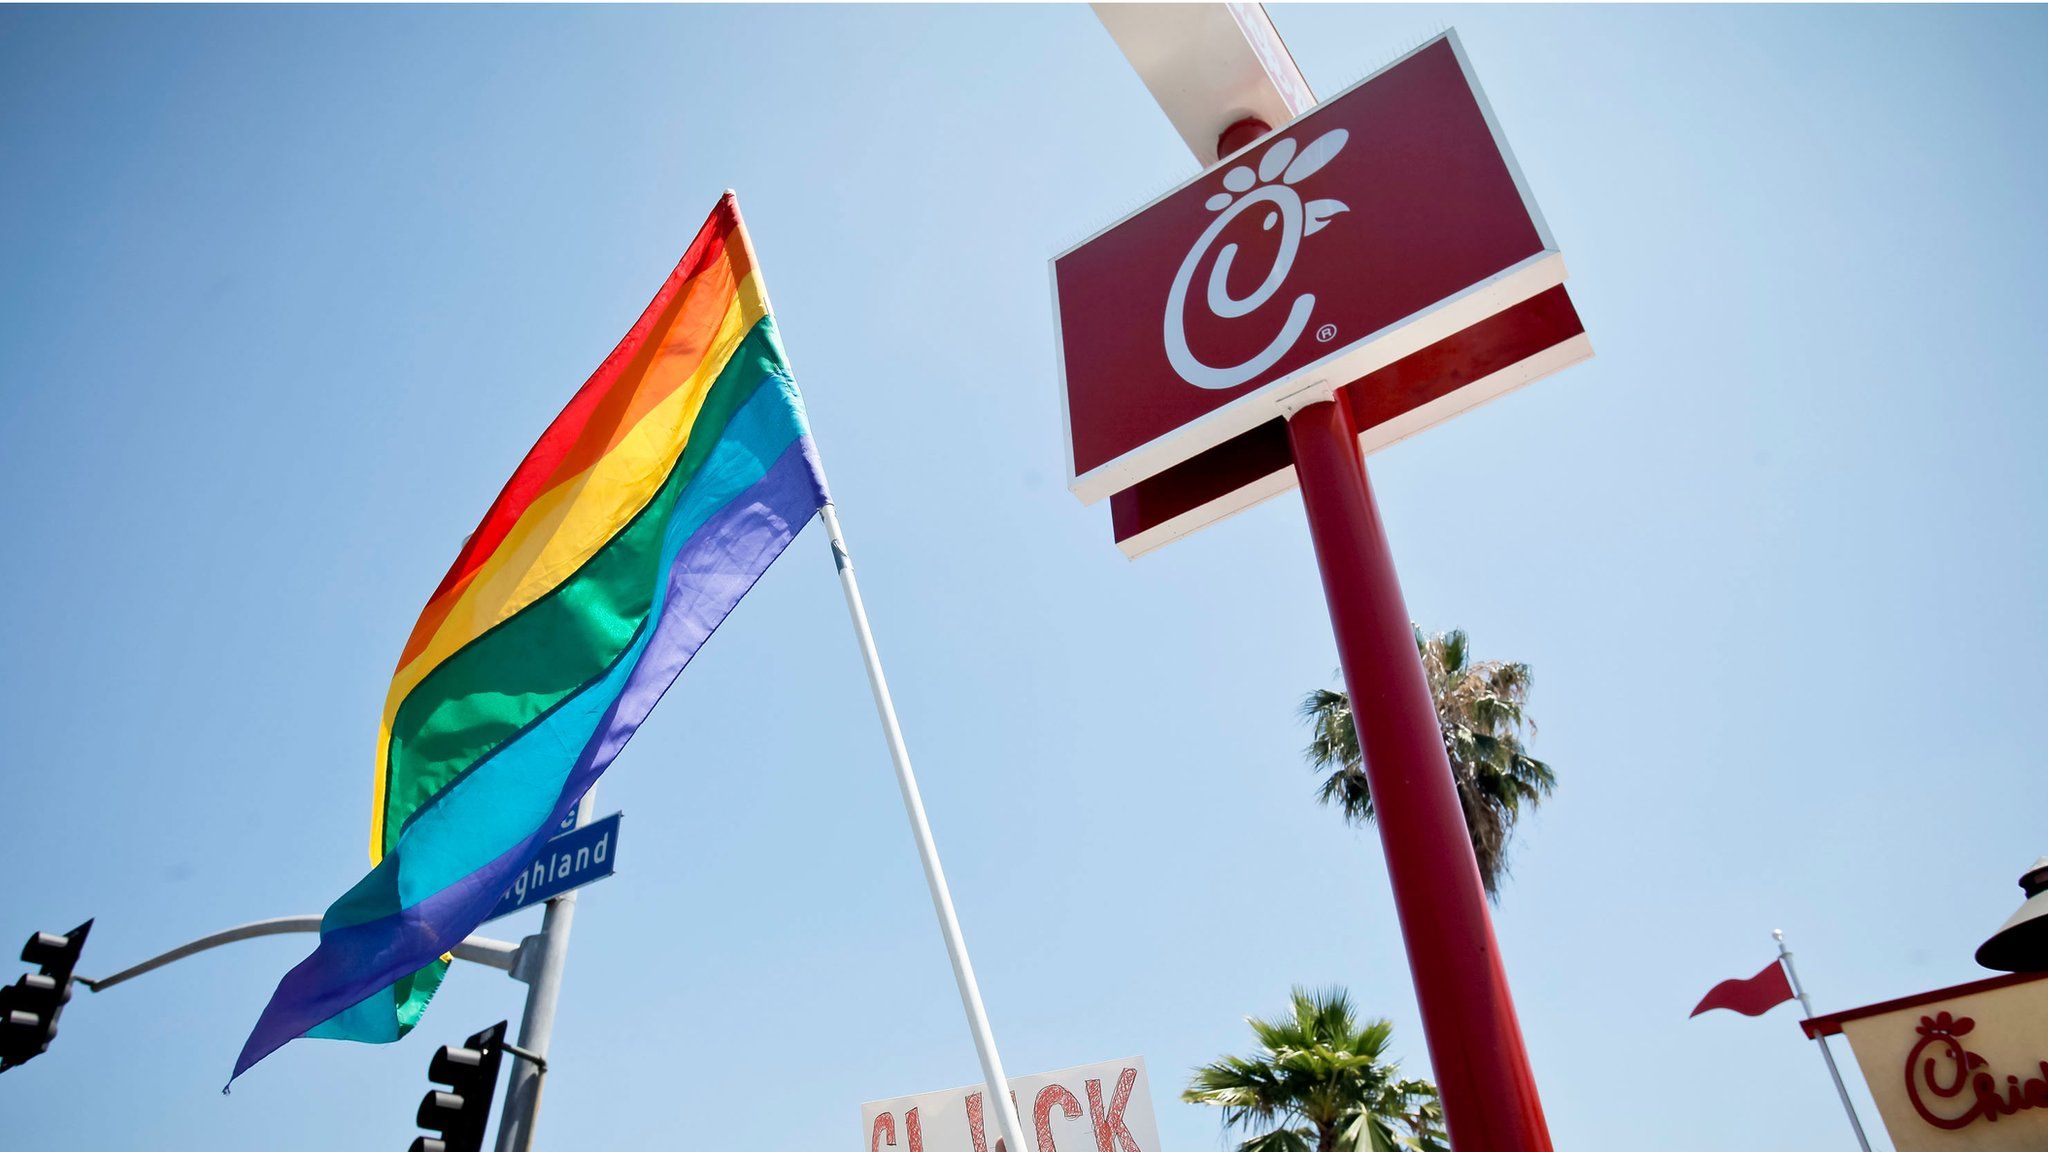 The Chick-fil-A at the 'Chick-Fil-A Is Anti-Gay!' PETA and LGBT community protest at Chick-fil-A on August 1, 2012 in Hollywood, California.